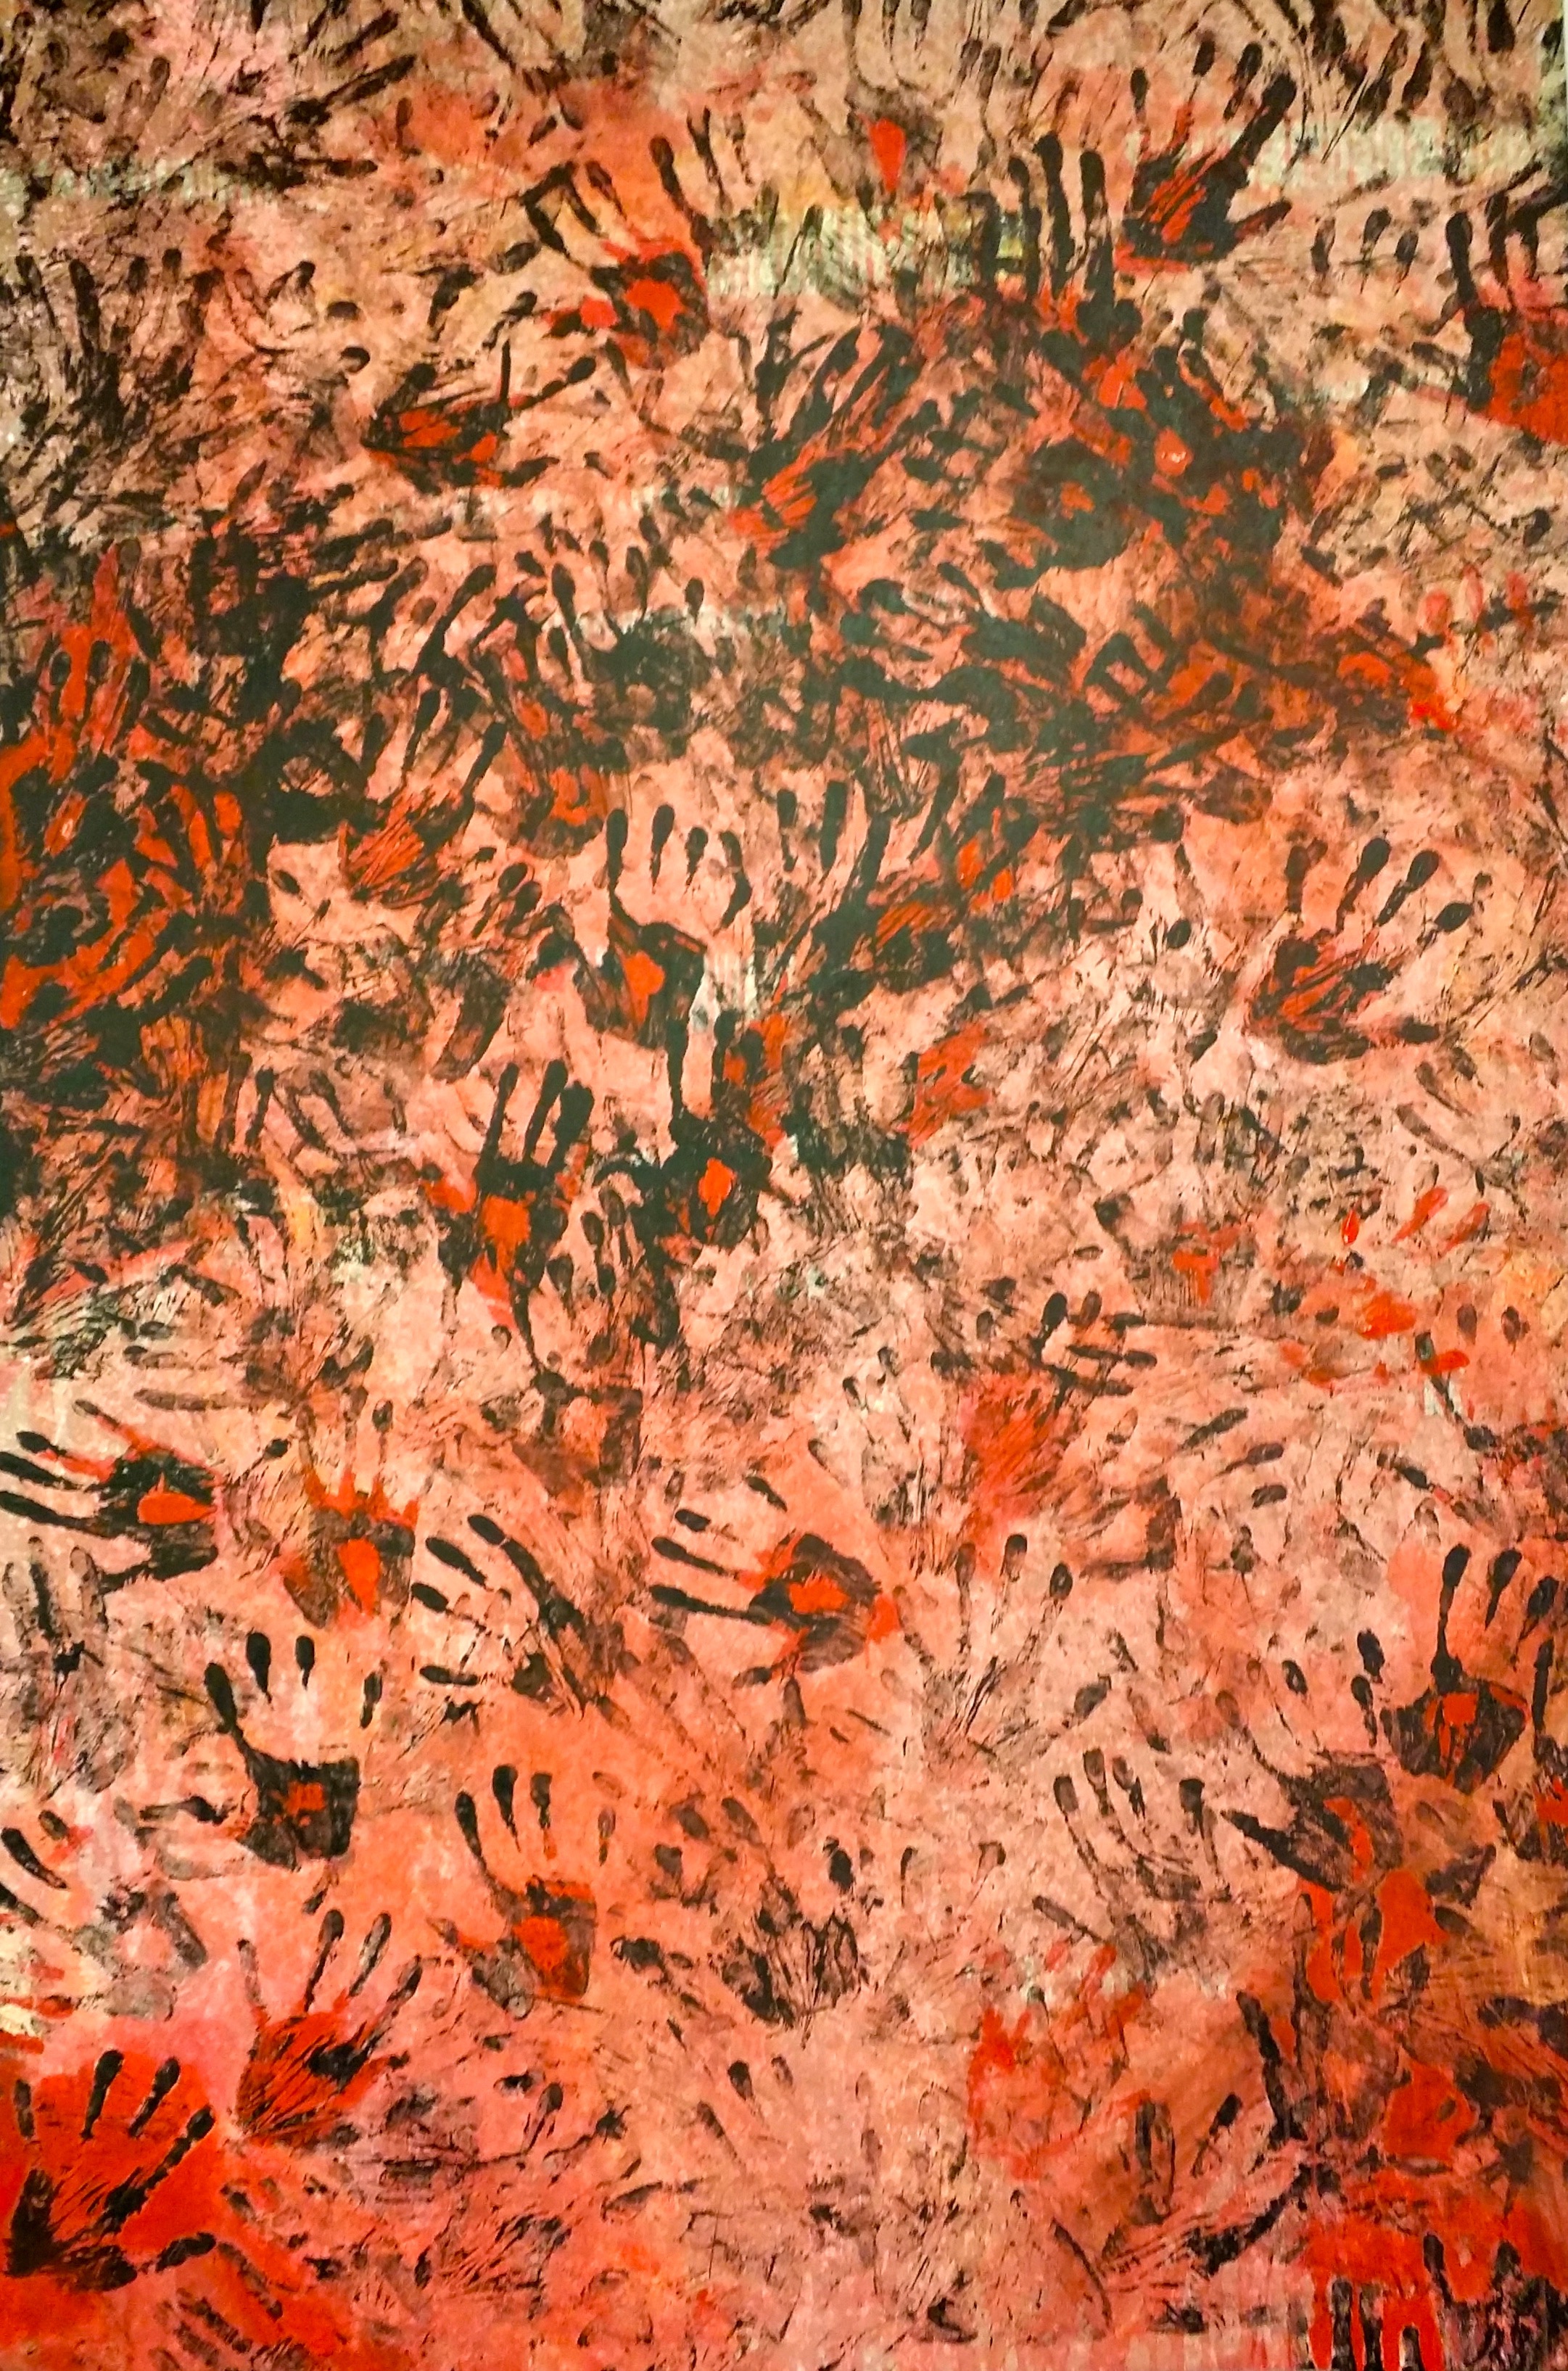  Dabiq: Red Sunset, 2016 72 x 48 inches Acrylic, mixed media on canvas                                                  The handprints technique connects me to the work in a physical way.&nbsp;The images that emerge come together but also disappear i